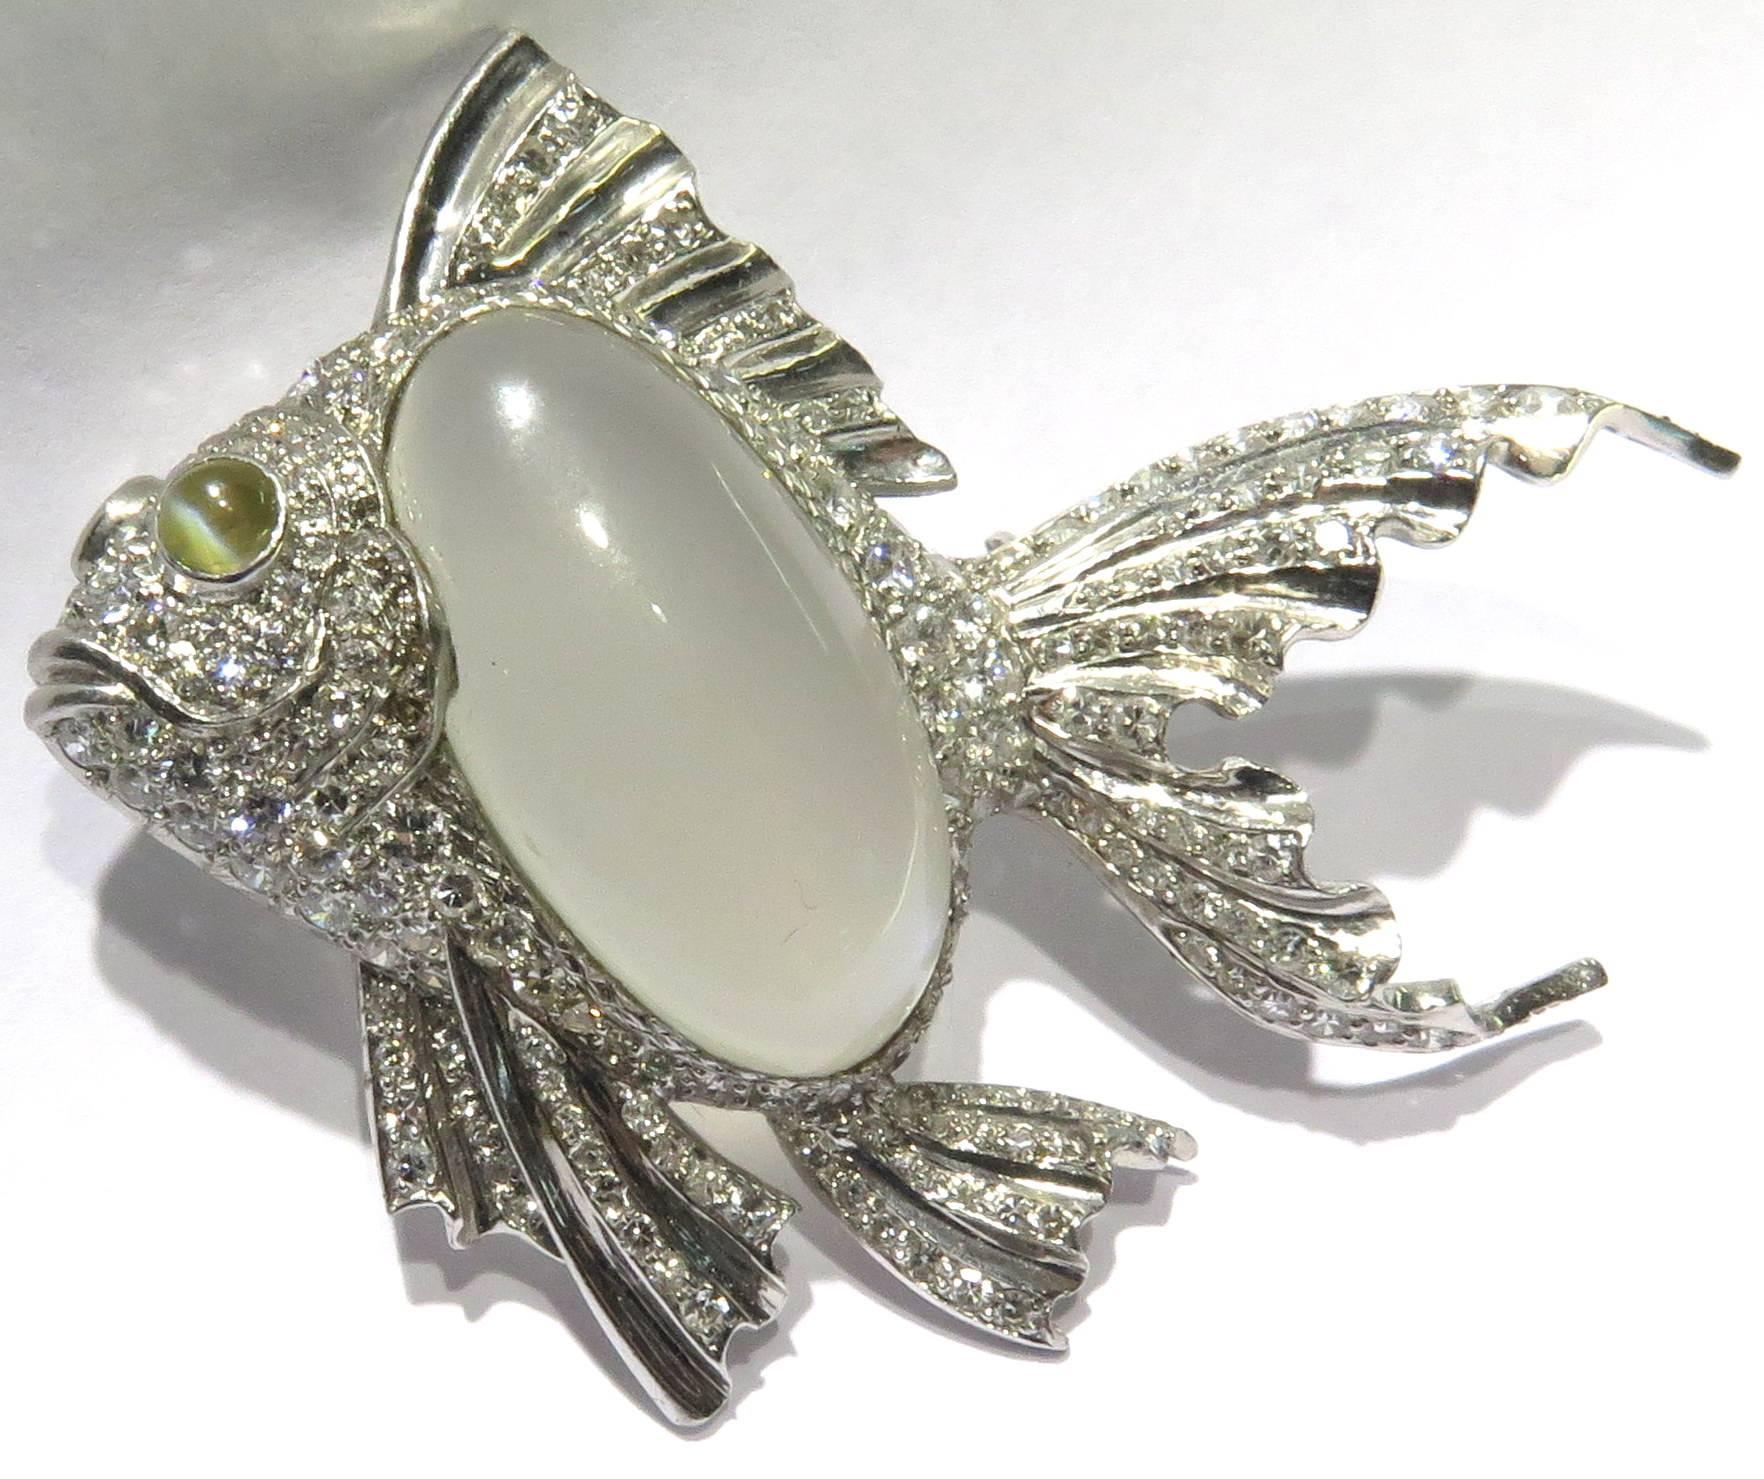 This large incredible platinum pin is made with so much quality! The large oval shape moonstone has a beautiful blueish hue and the chrysoberyl cats eye has a very sharp eye. The moonstone weighs approx 40ct. and there are approx 2.35ct